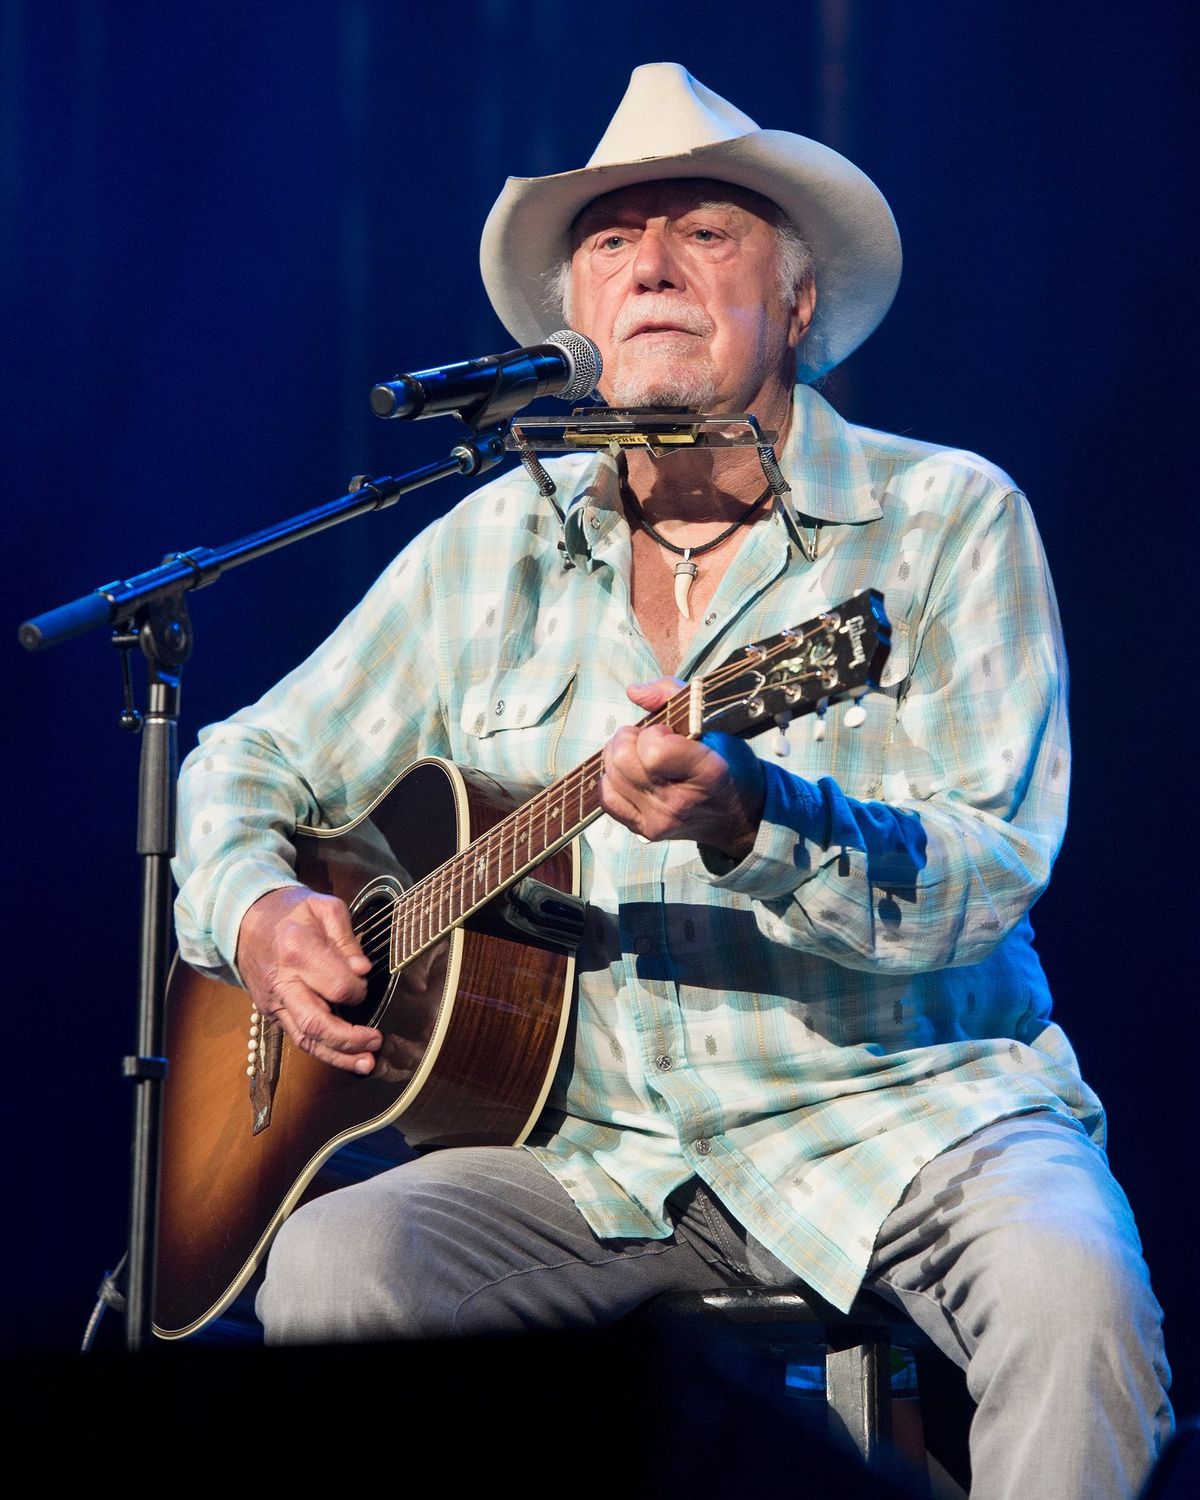 Jerry Jeff Walker performs at Ryman Auditorium on August 16, 2016, in Nashville, Tennessee | Photo: Erika Goldring/Getty Images